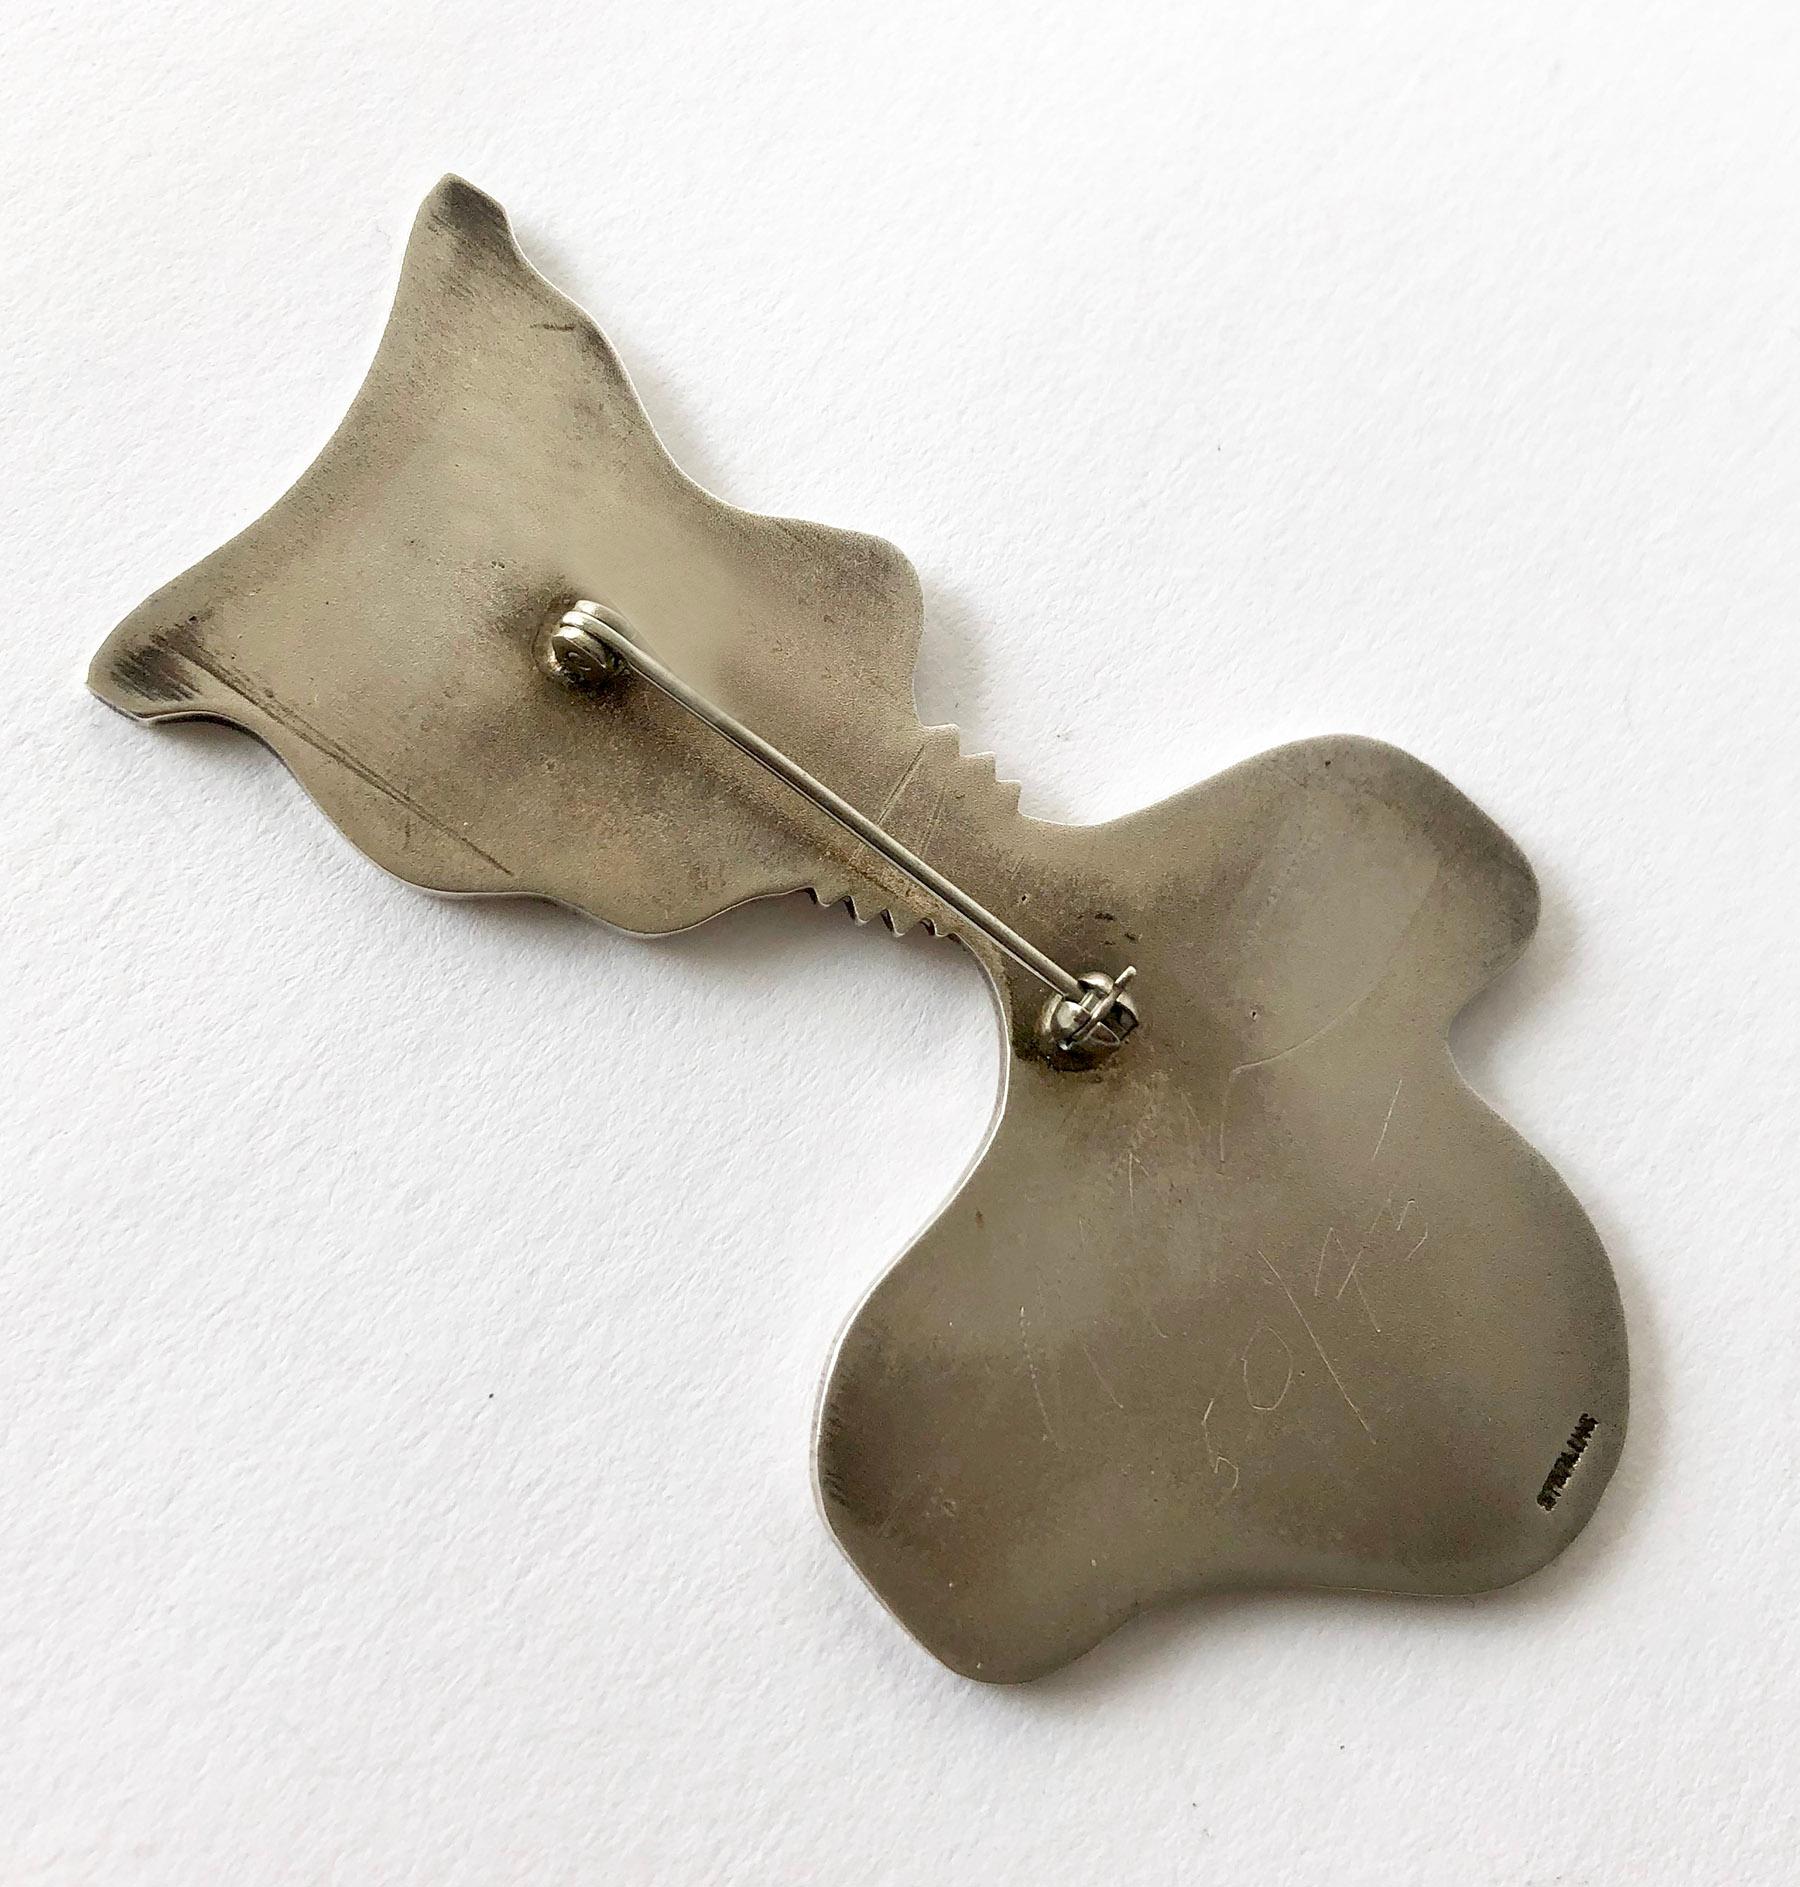 Heavy gauge, highly polished sterling silver pop art brooch by listed artist and sculptor Arman.  Brooch measures 3.5